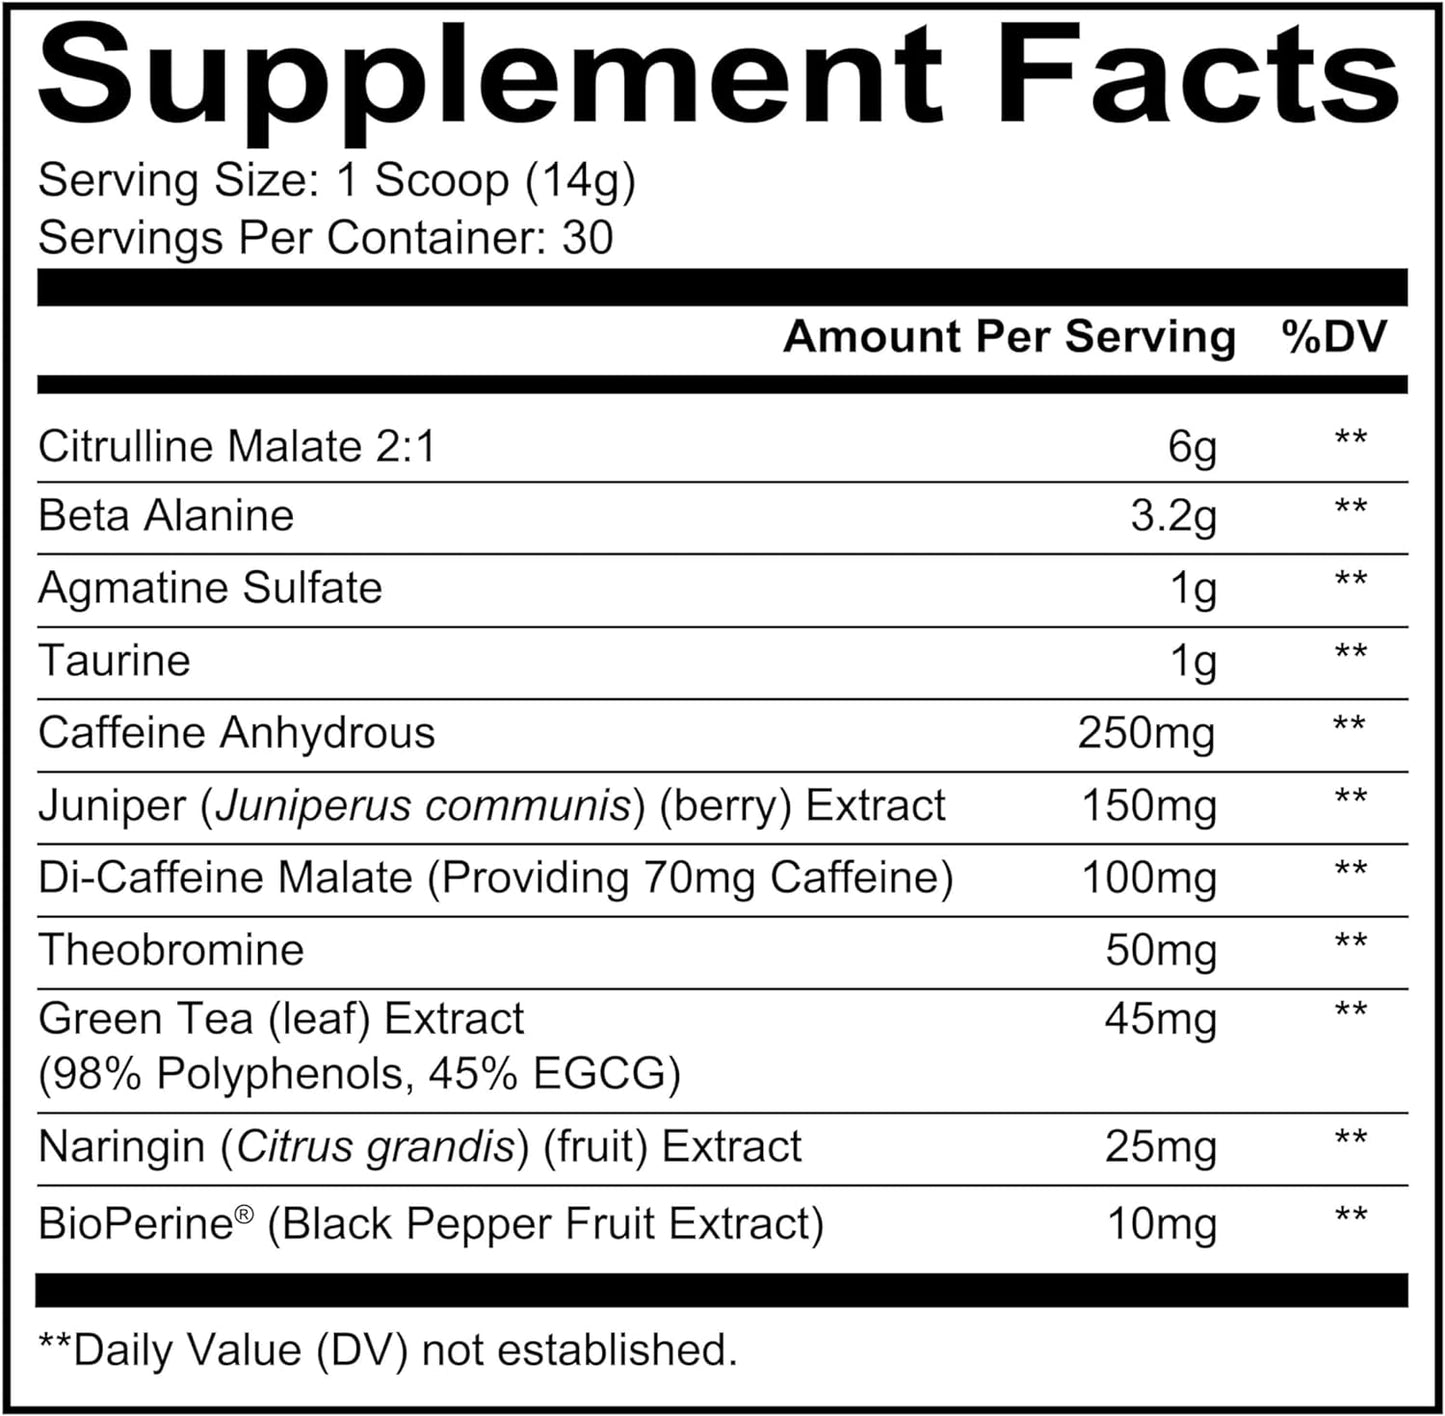 Total War Pre-Workout 30 Servings Sour Wild Berry